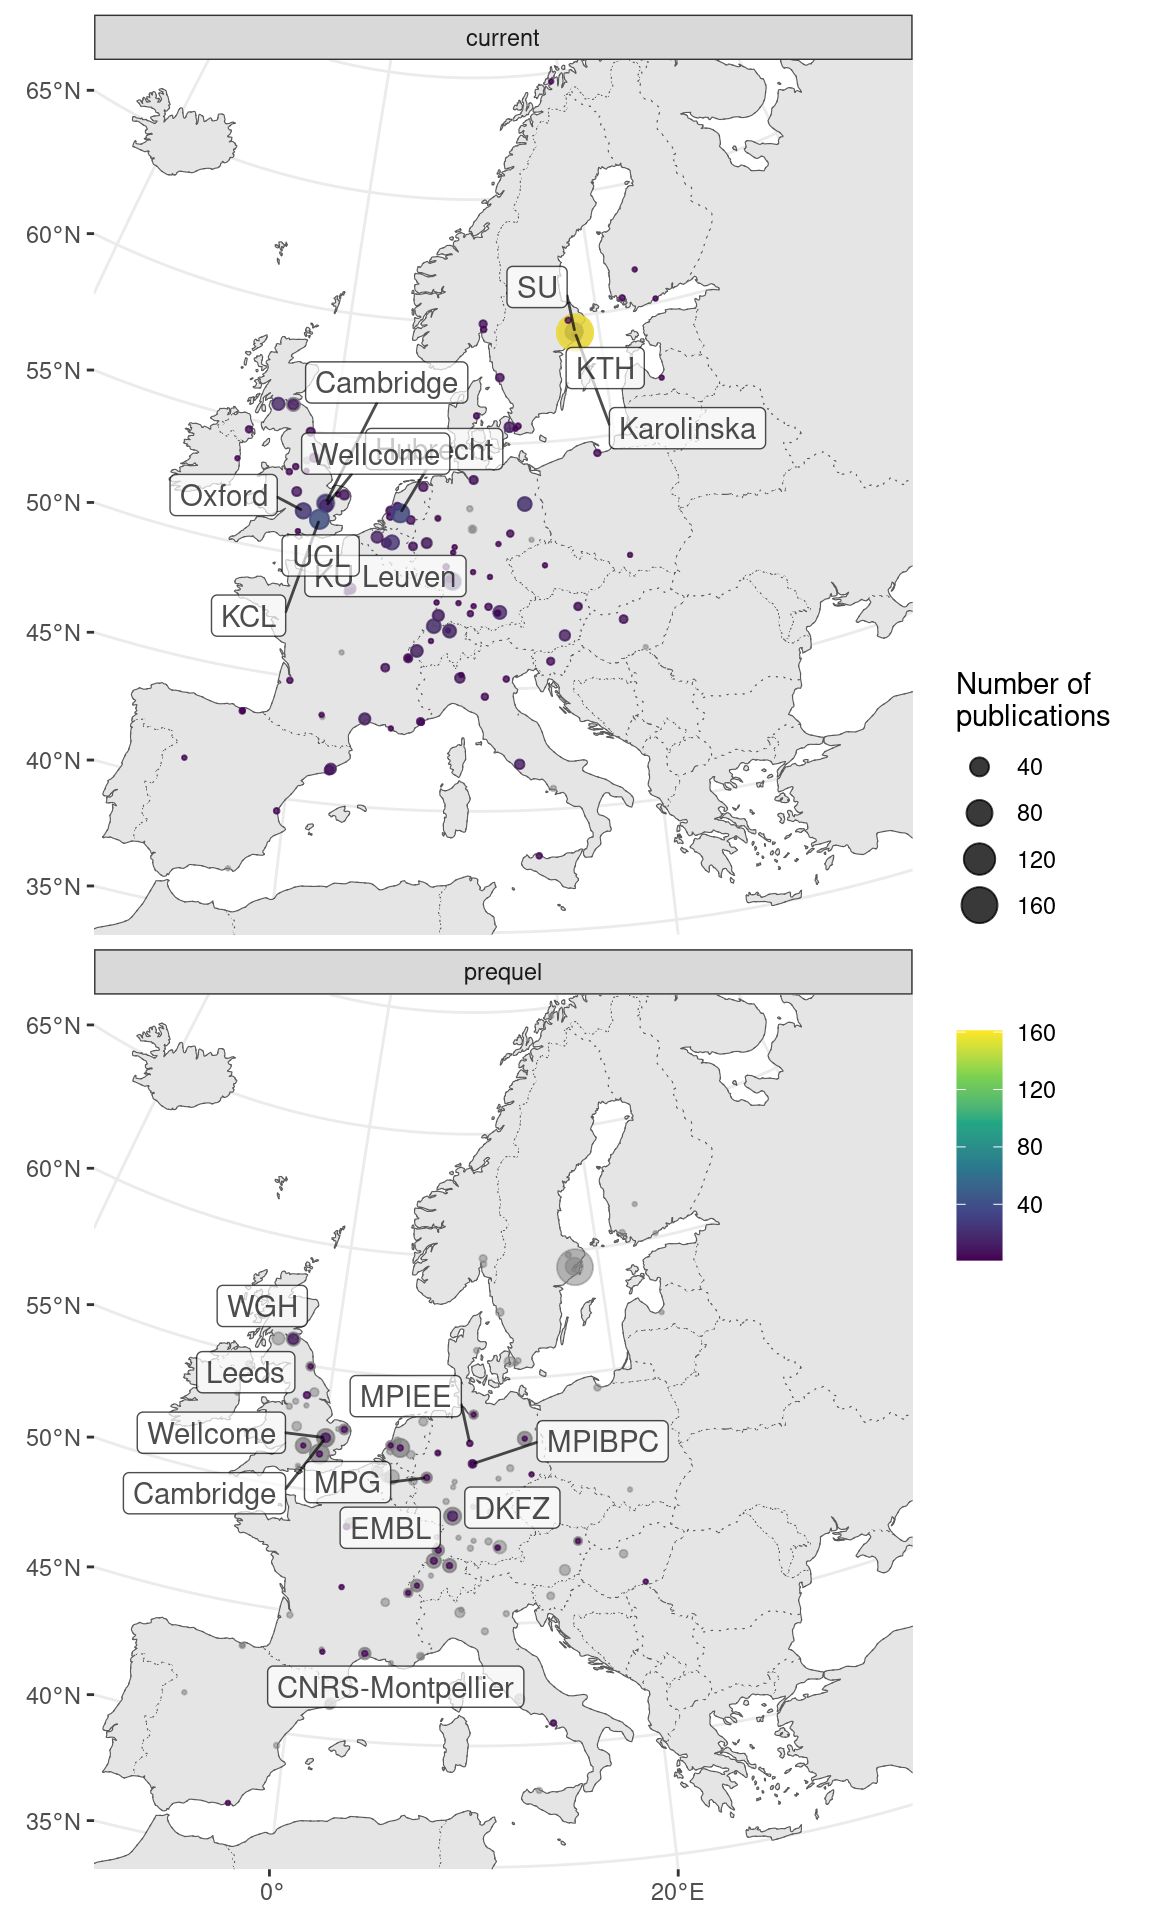 Map of institutions around western Europe. Area of the point is proportional to the number of publications from that city. Gray points are sum of both prequel and current eras for each city. Top 10 institutions in each era are labeled.